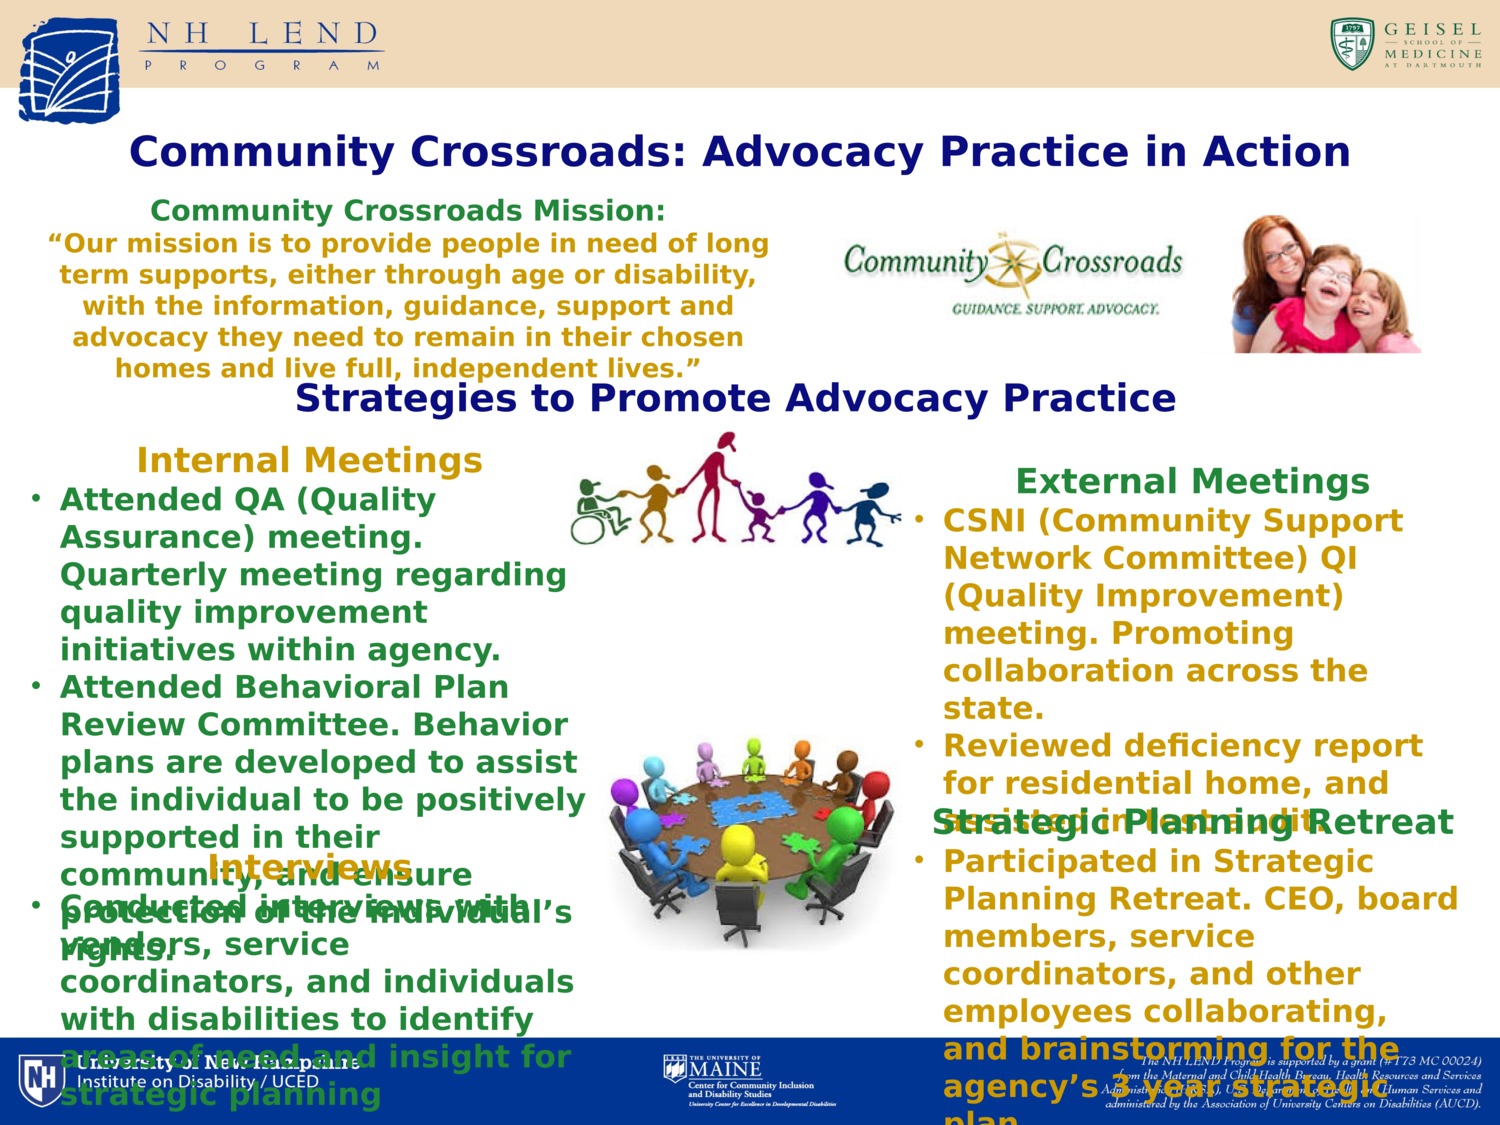 Community Crossroads: Advocacy Practice In Action by aln1